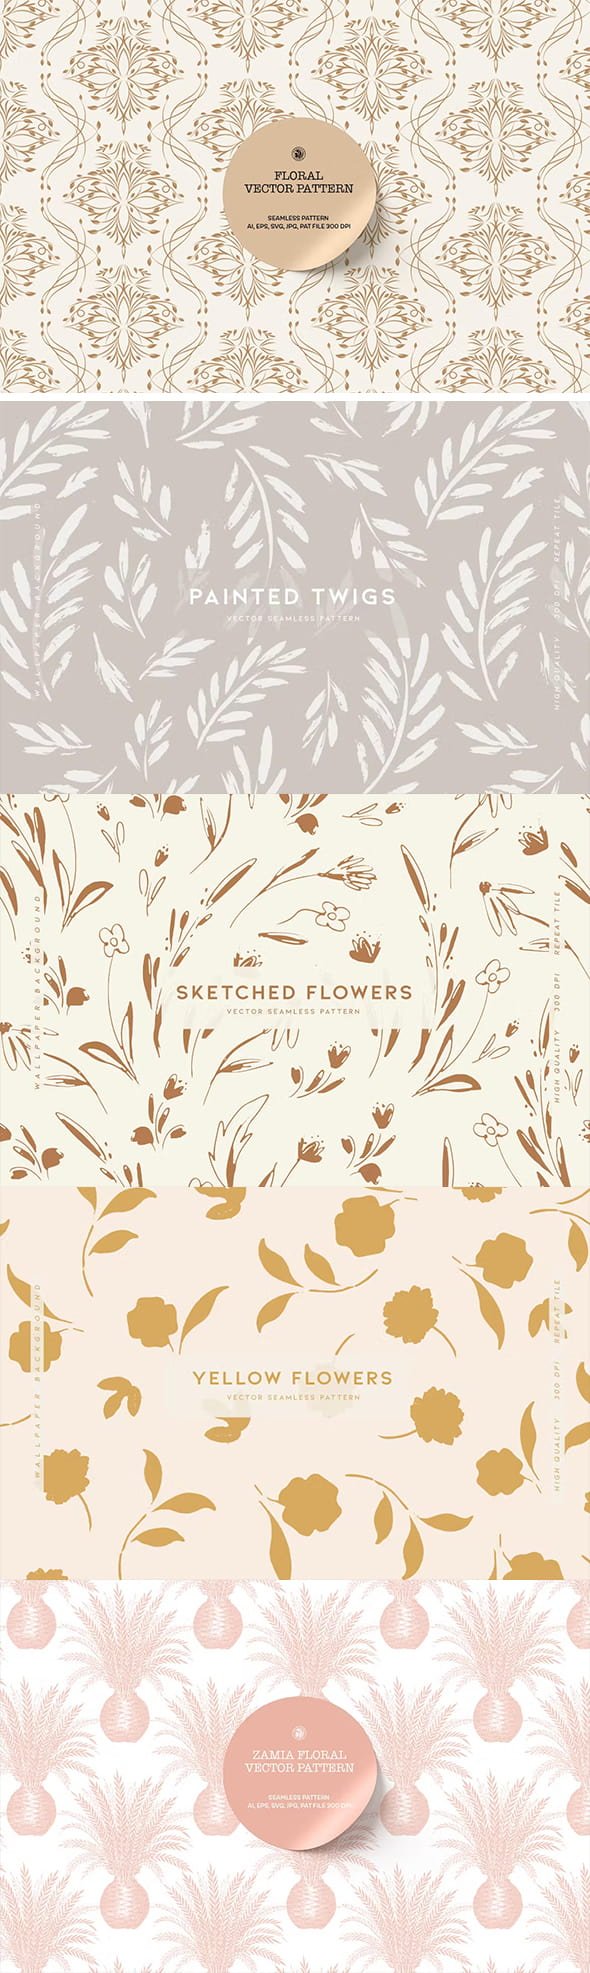 5 Floral Masterpieces Collection Of Backgrounds